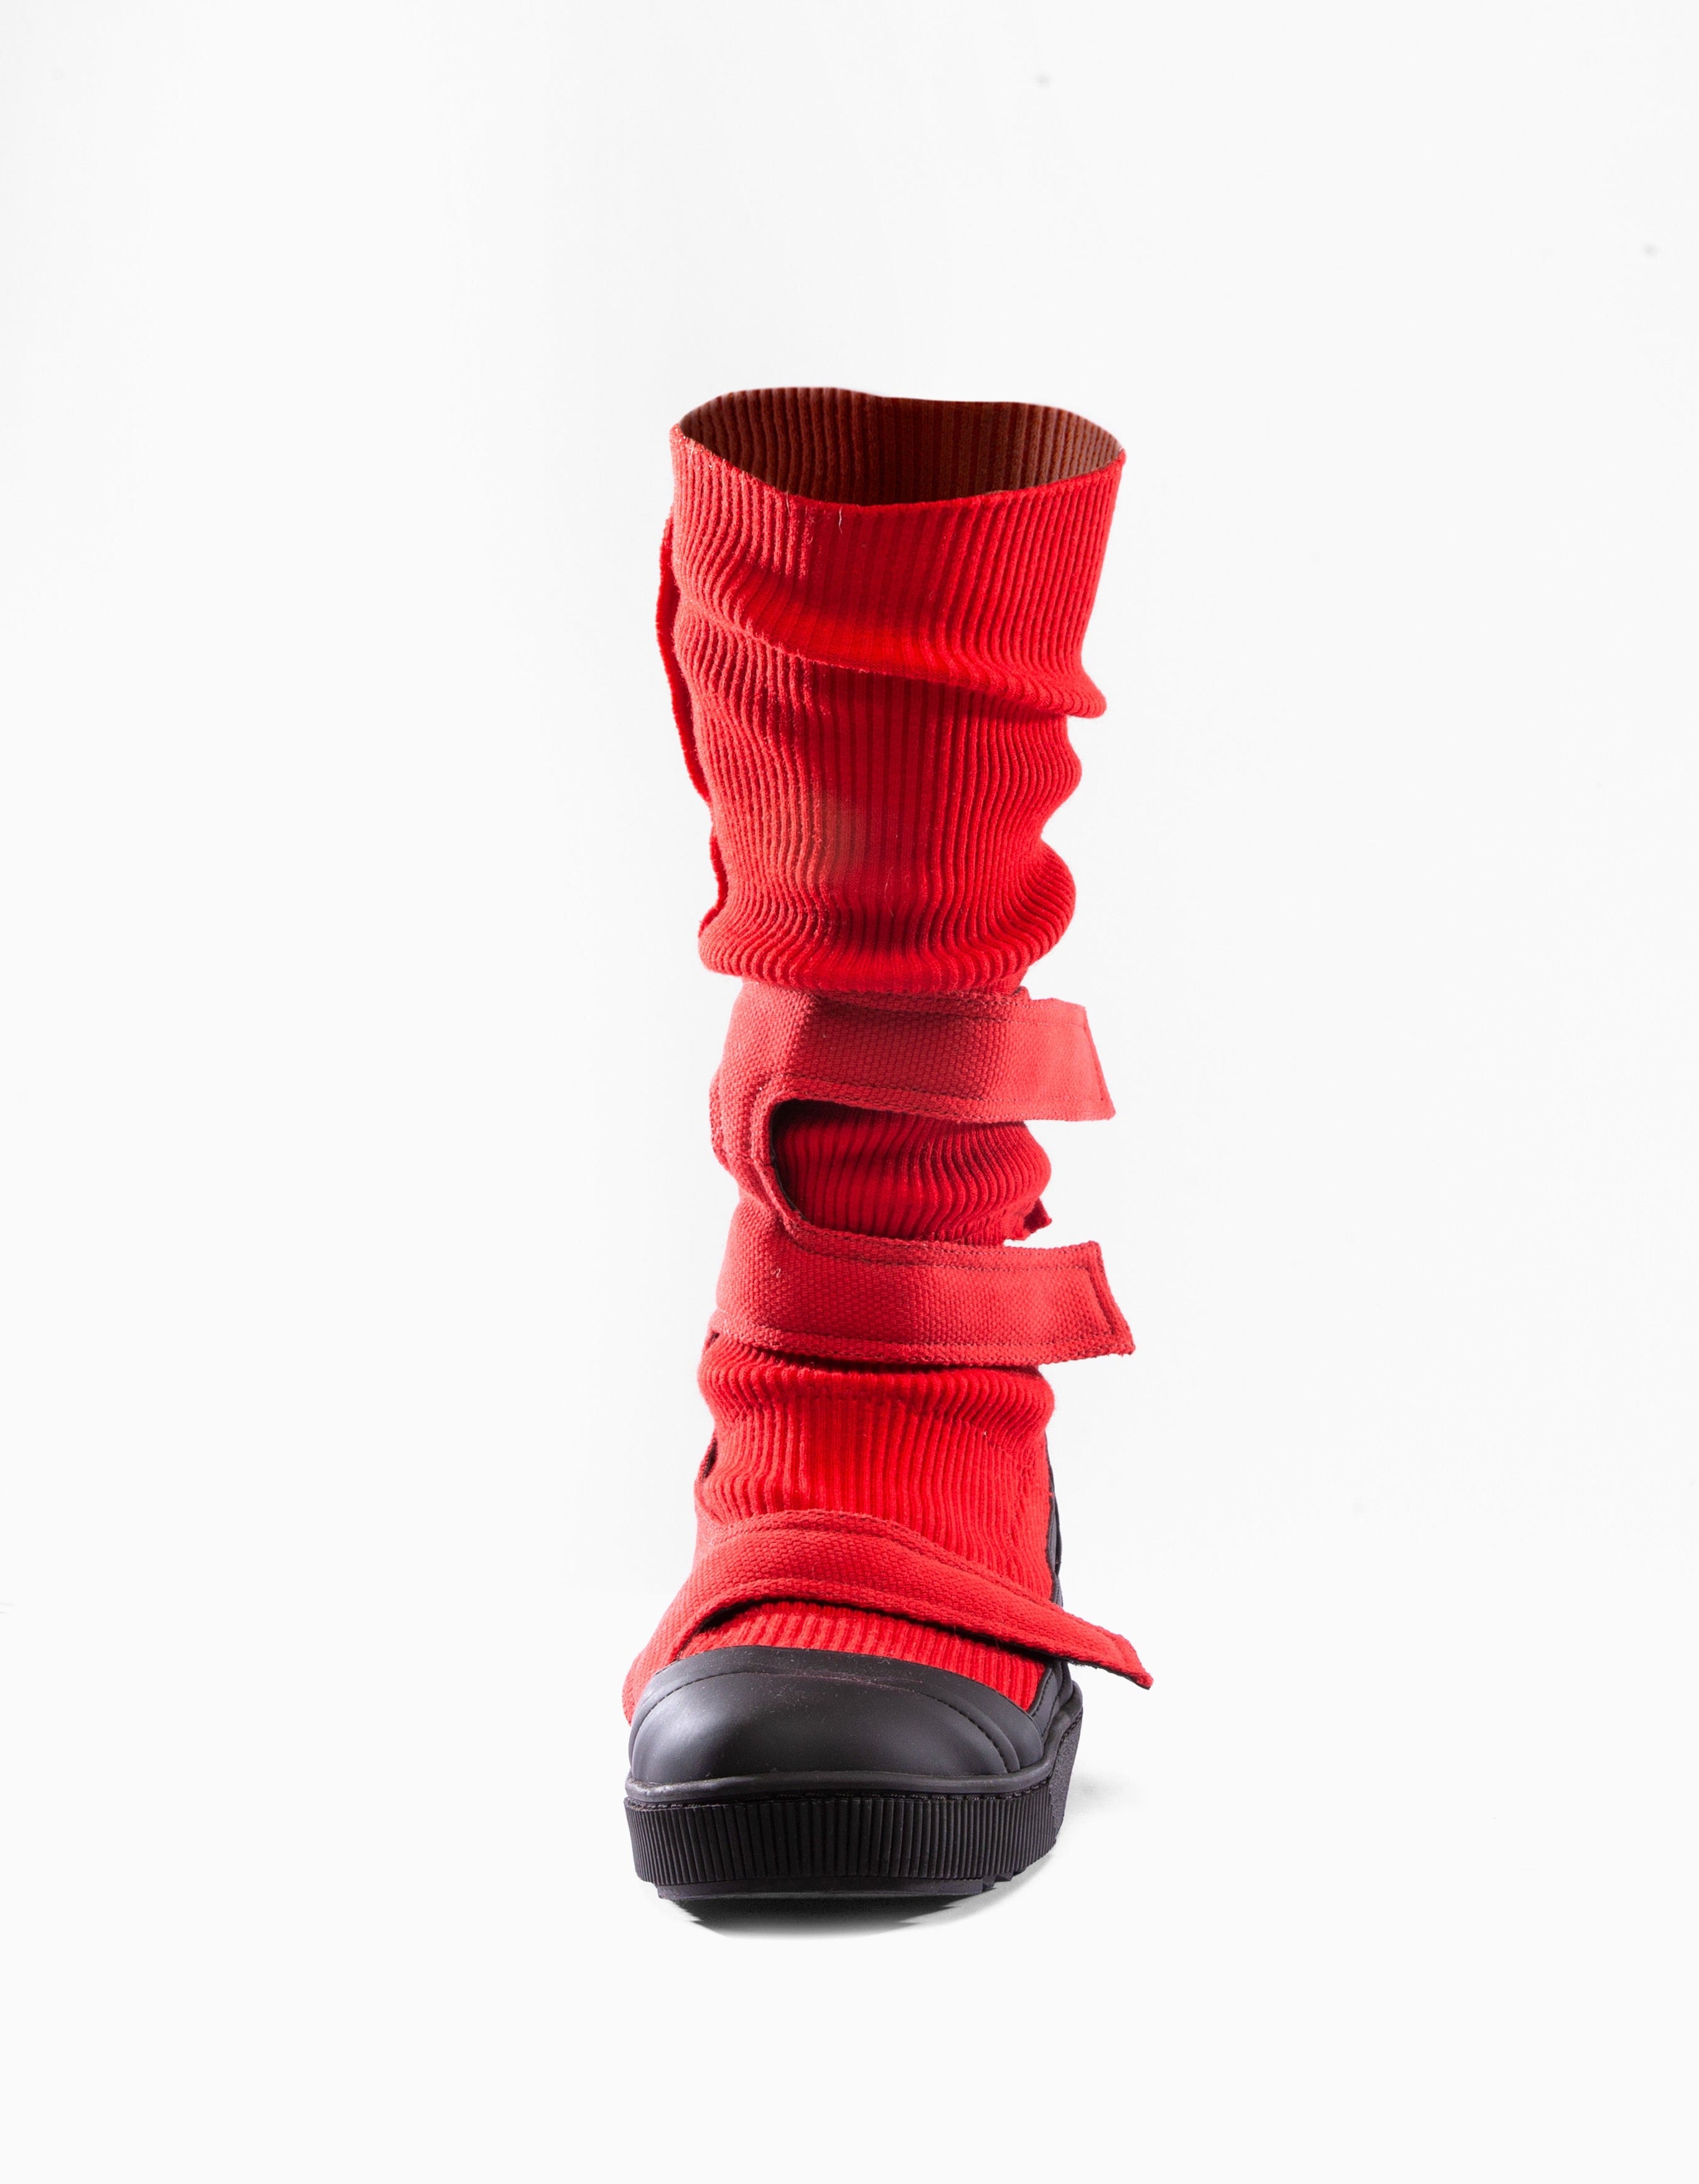 RIPSTIEFEL ROTES BAND M